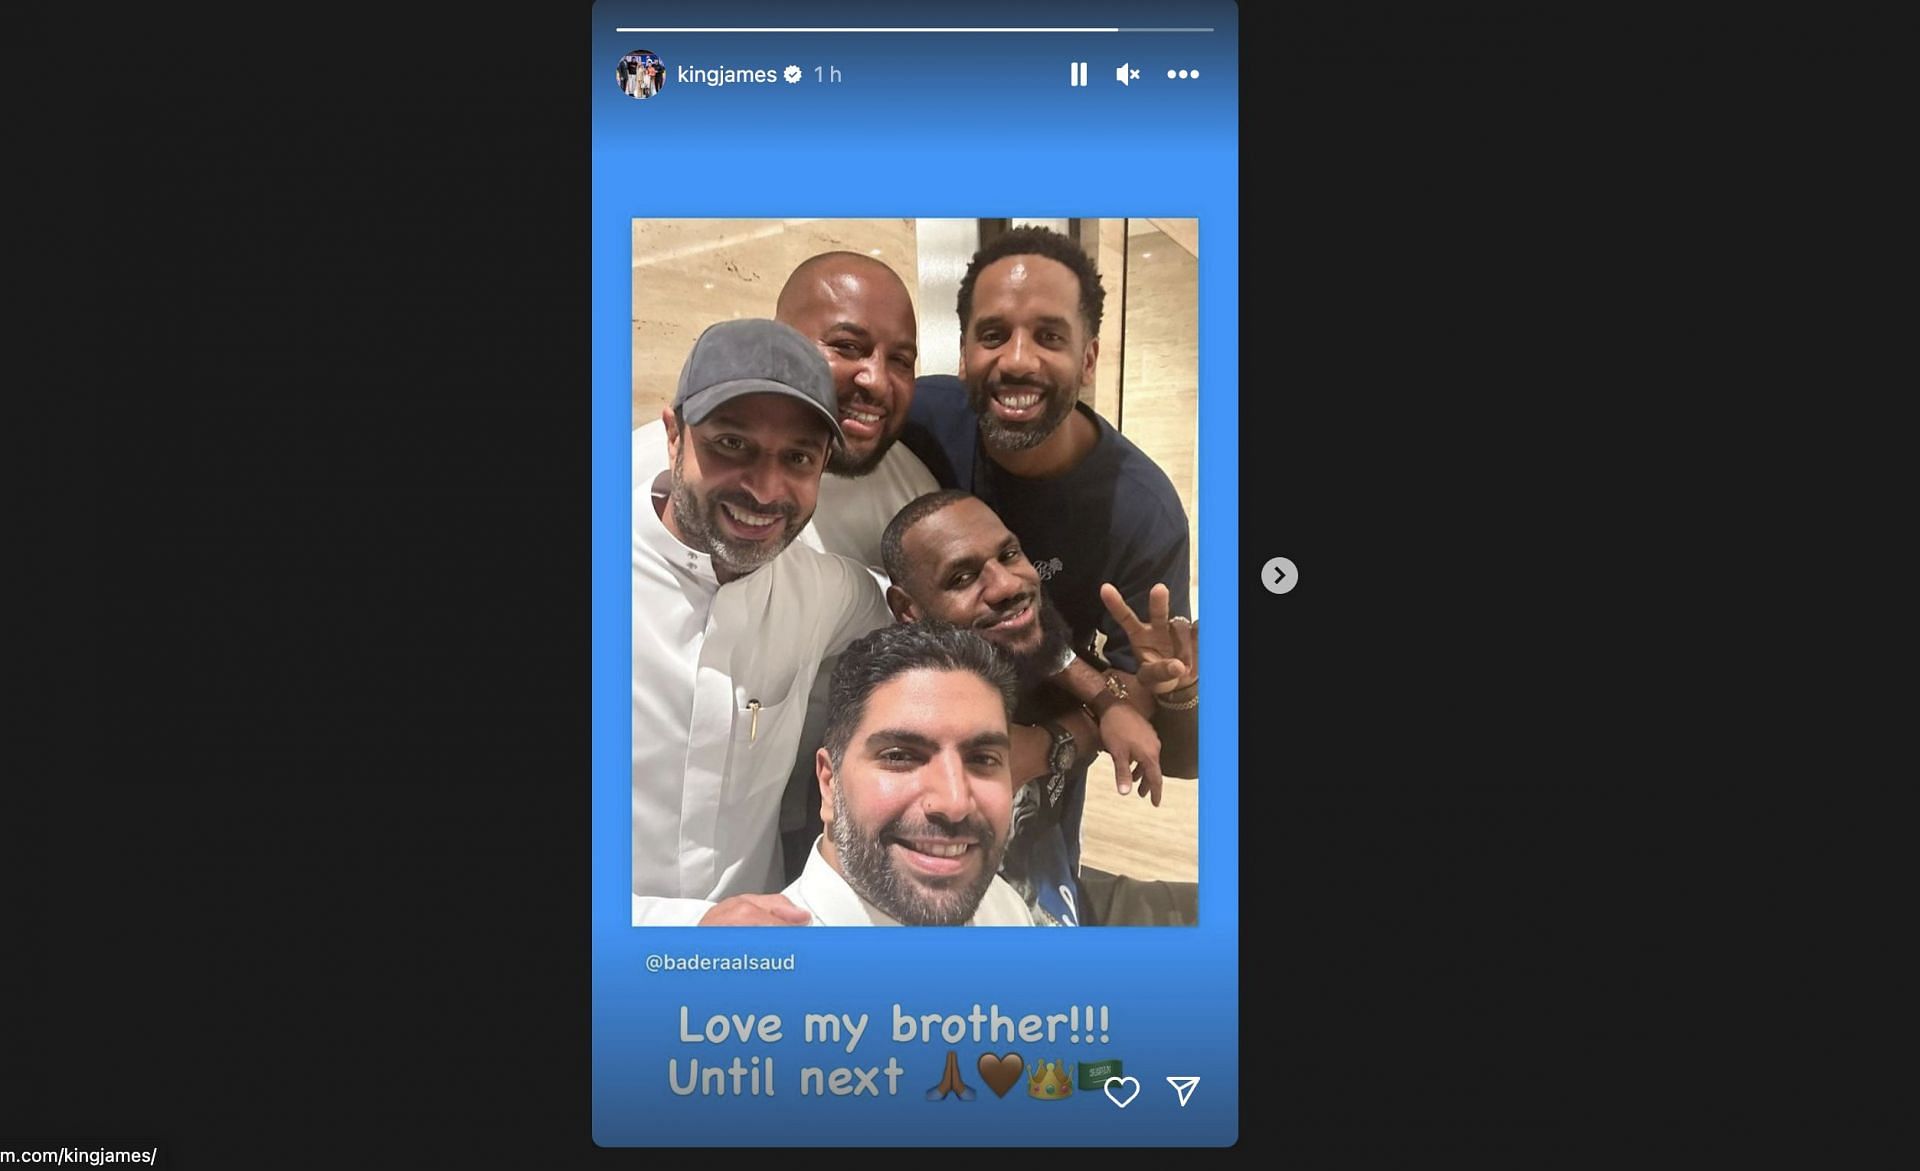 LeBron re-shares photo with Saudi Prince on Instagram story